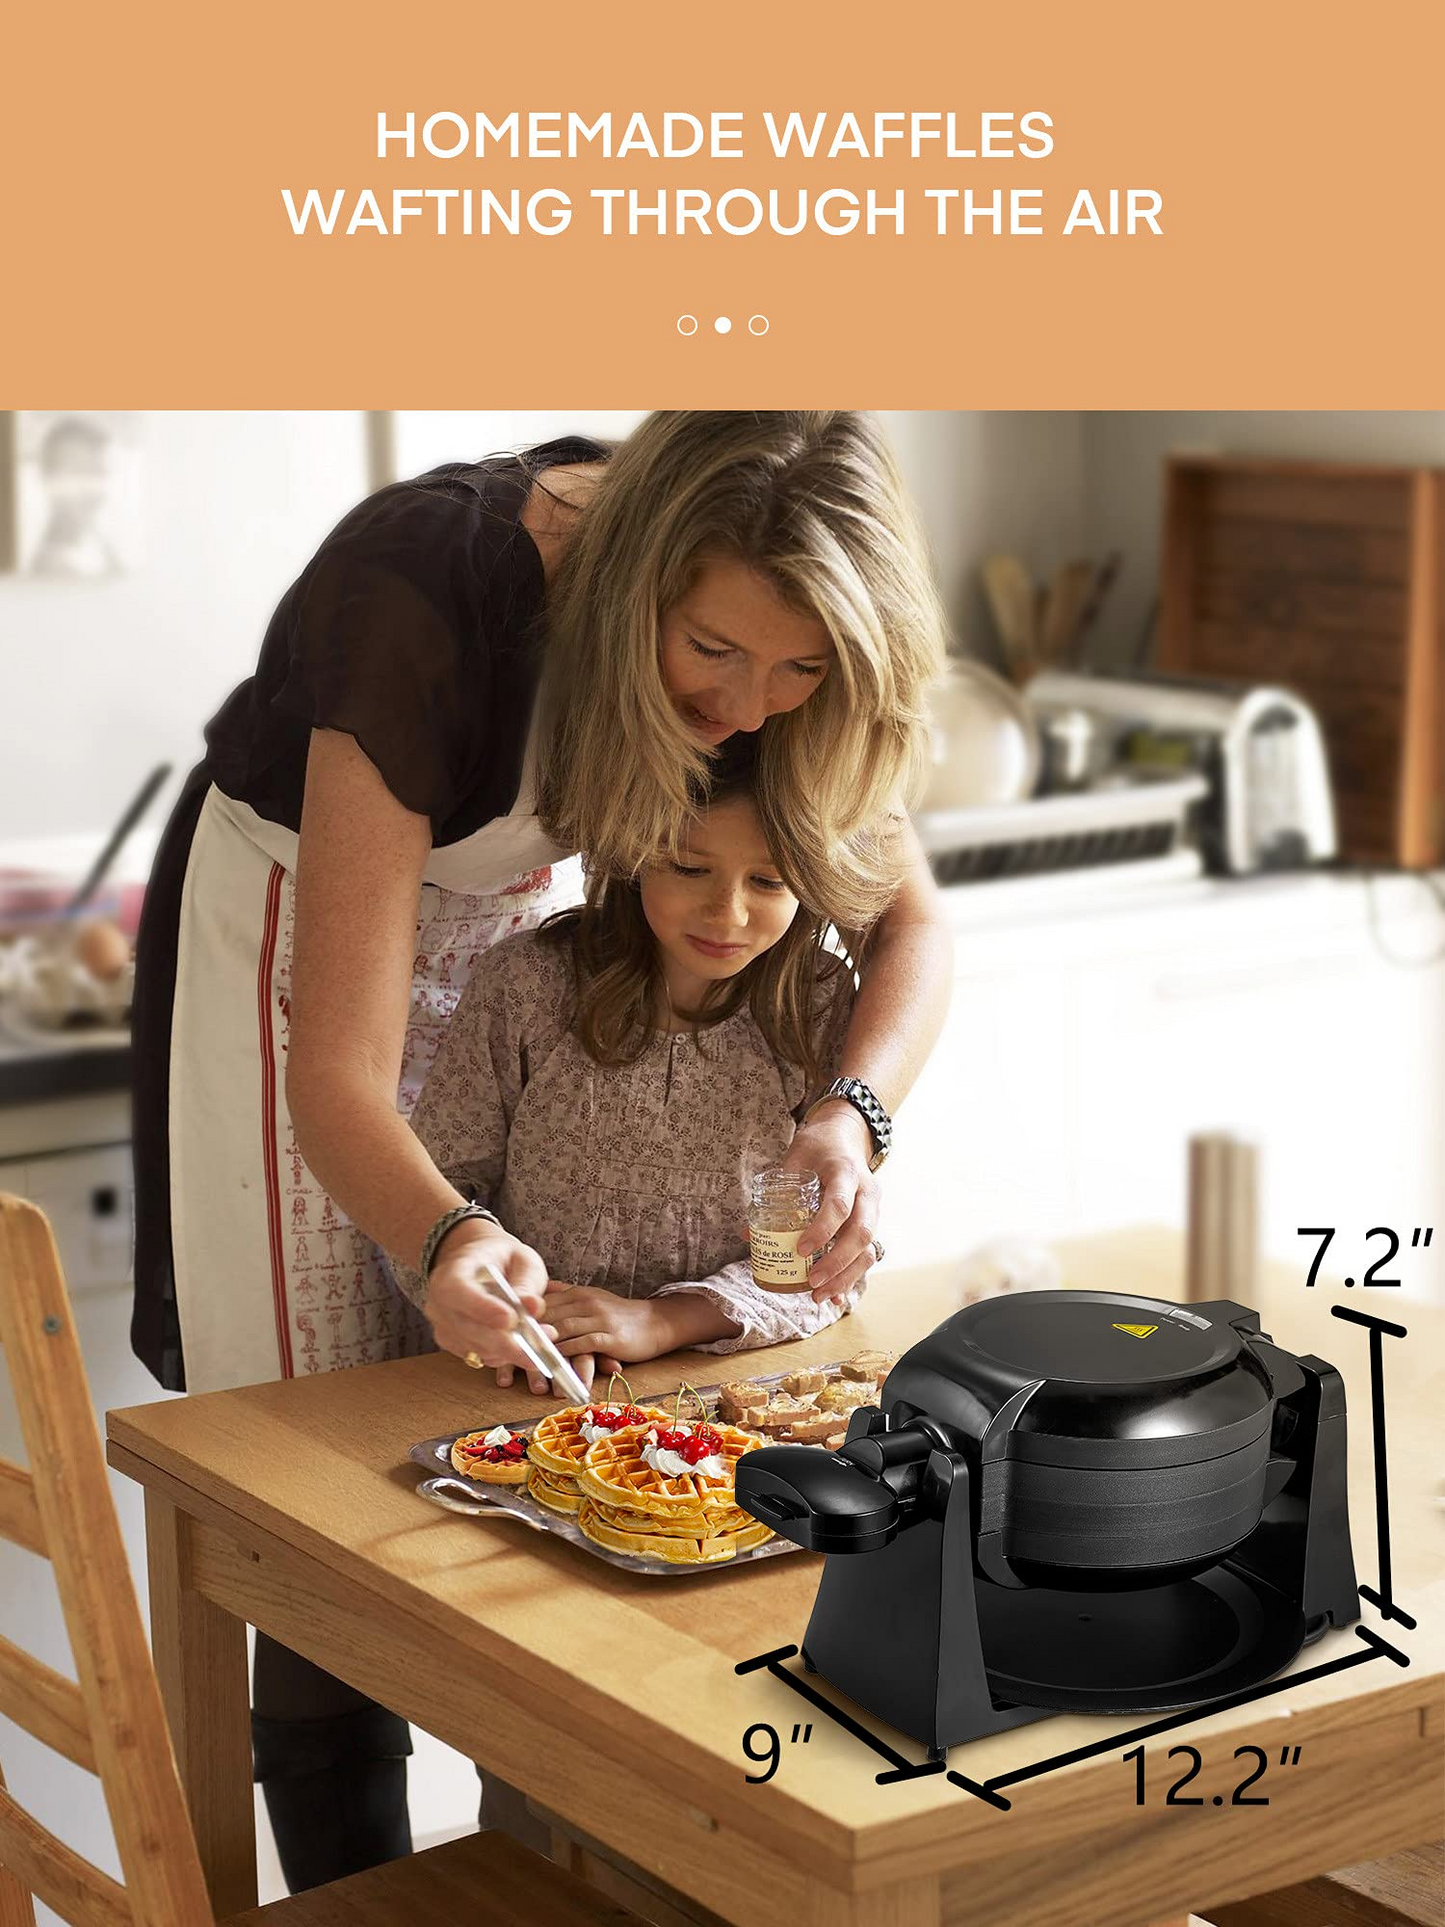 AICOOK | Double Waffle Maker 180° Flip, Belgian Waffle Iron 8 Slices One Time, Nonstick Plates, Removable Drip Tray & Rotating, 1400W Adjustable Temperature Control Cool Touch Handle, Black